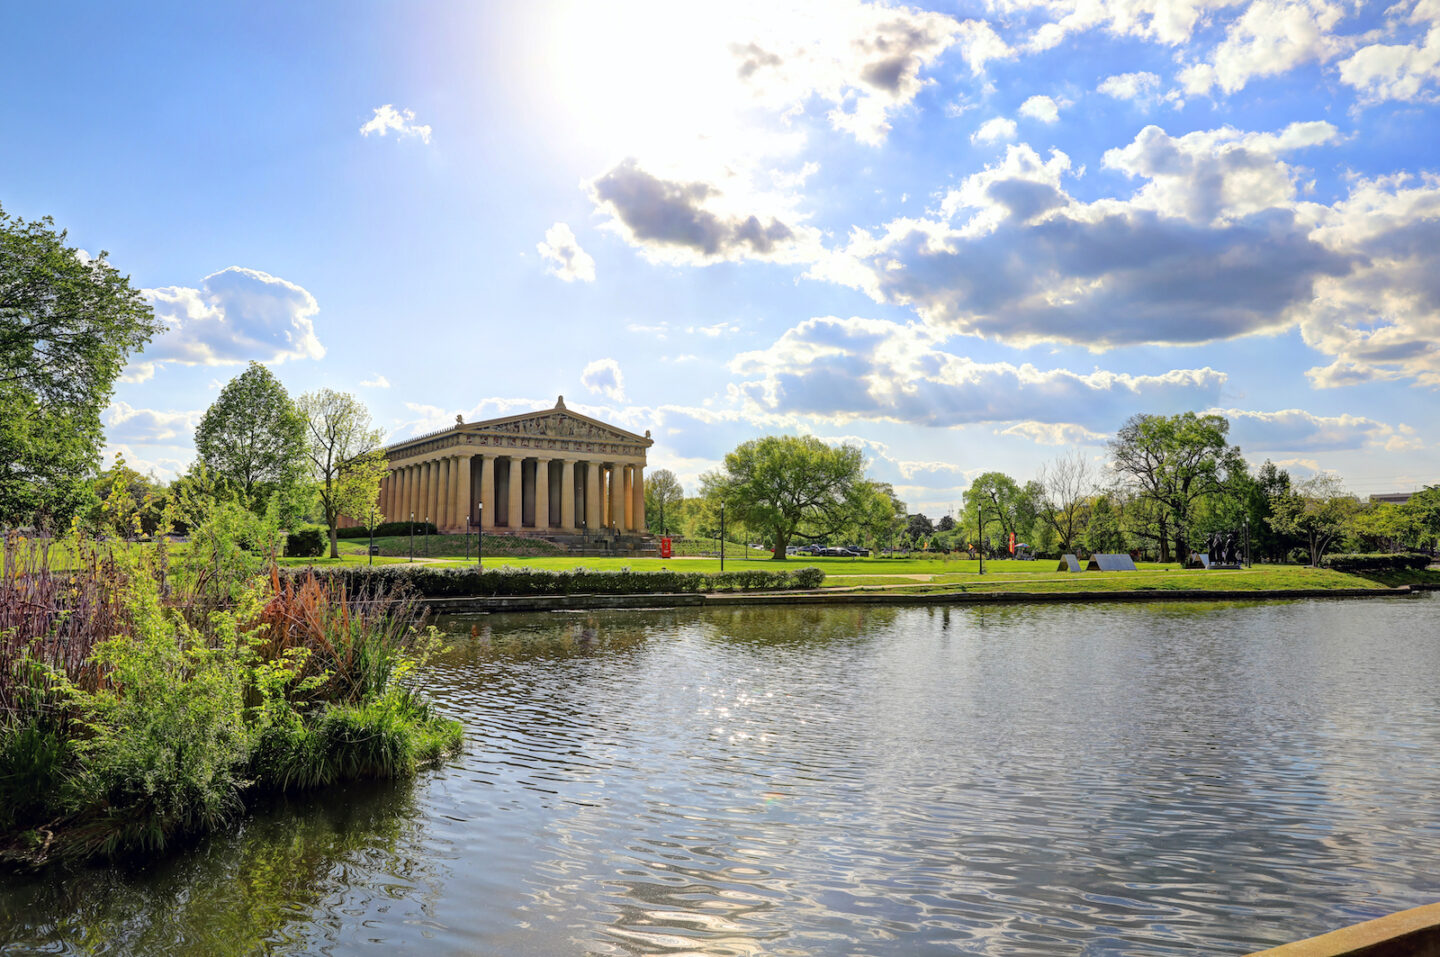 Top 10 Cheap Or Free Things To Do In Nashville, Tennessee - See The Parthenon At Centennial Park